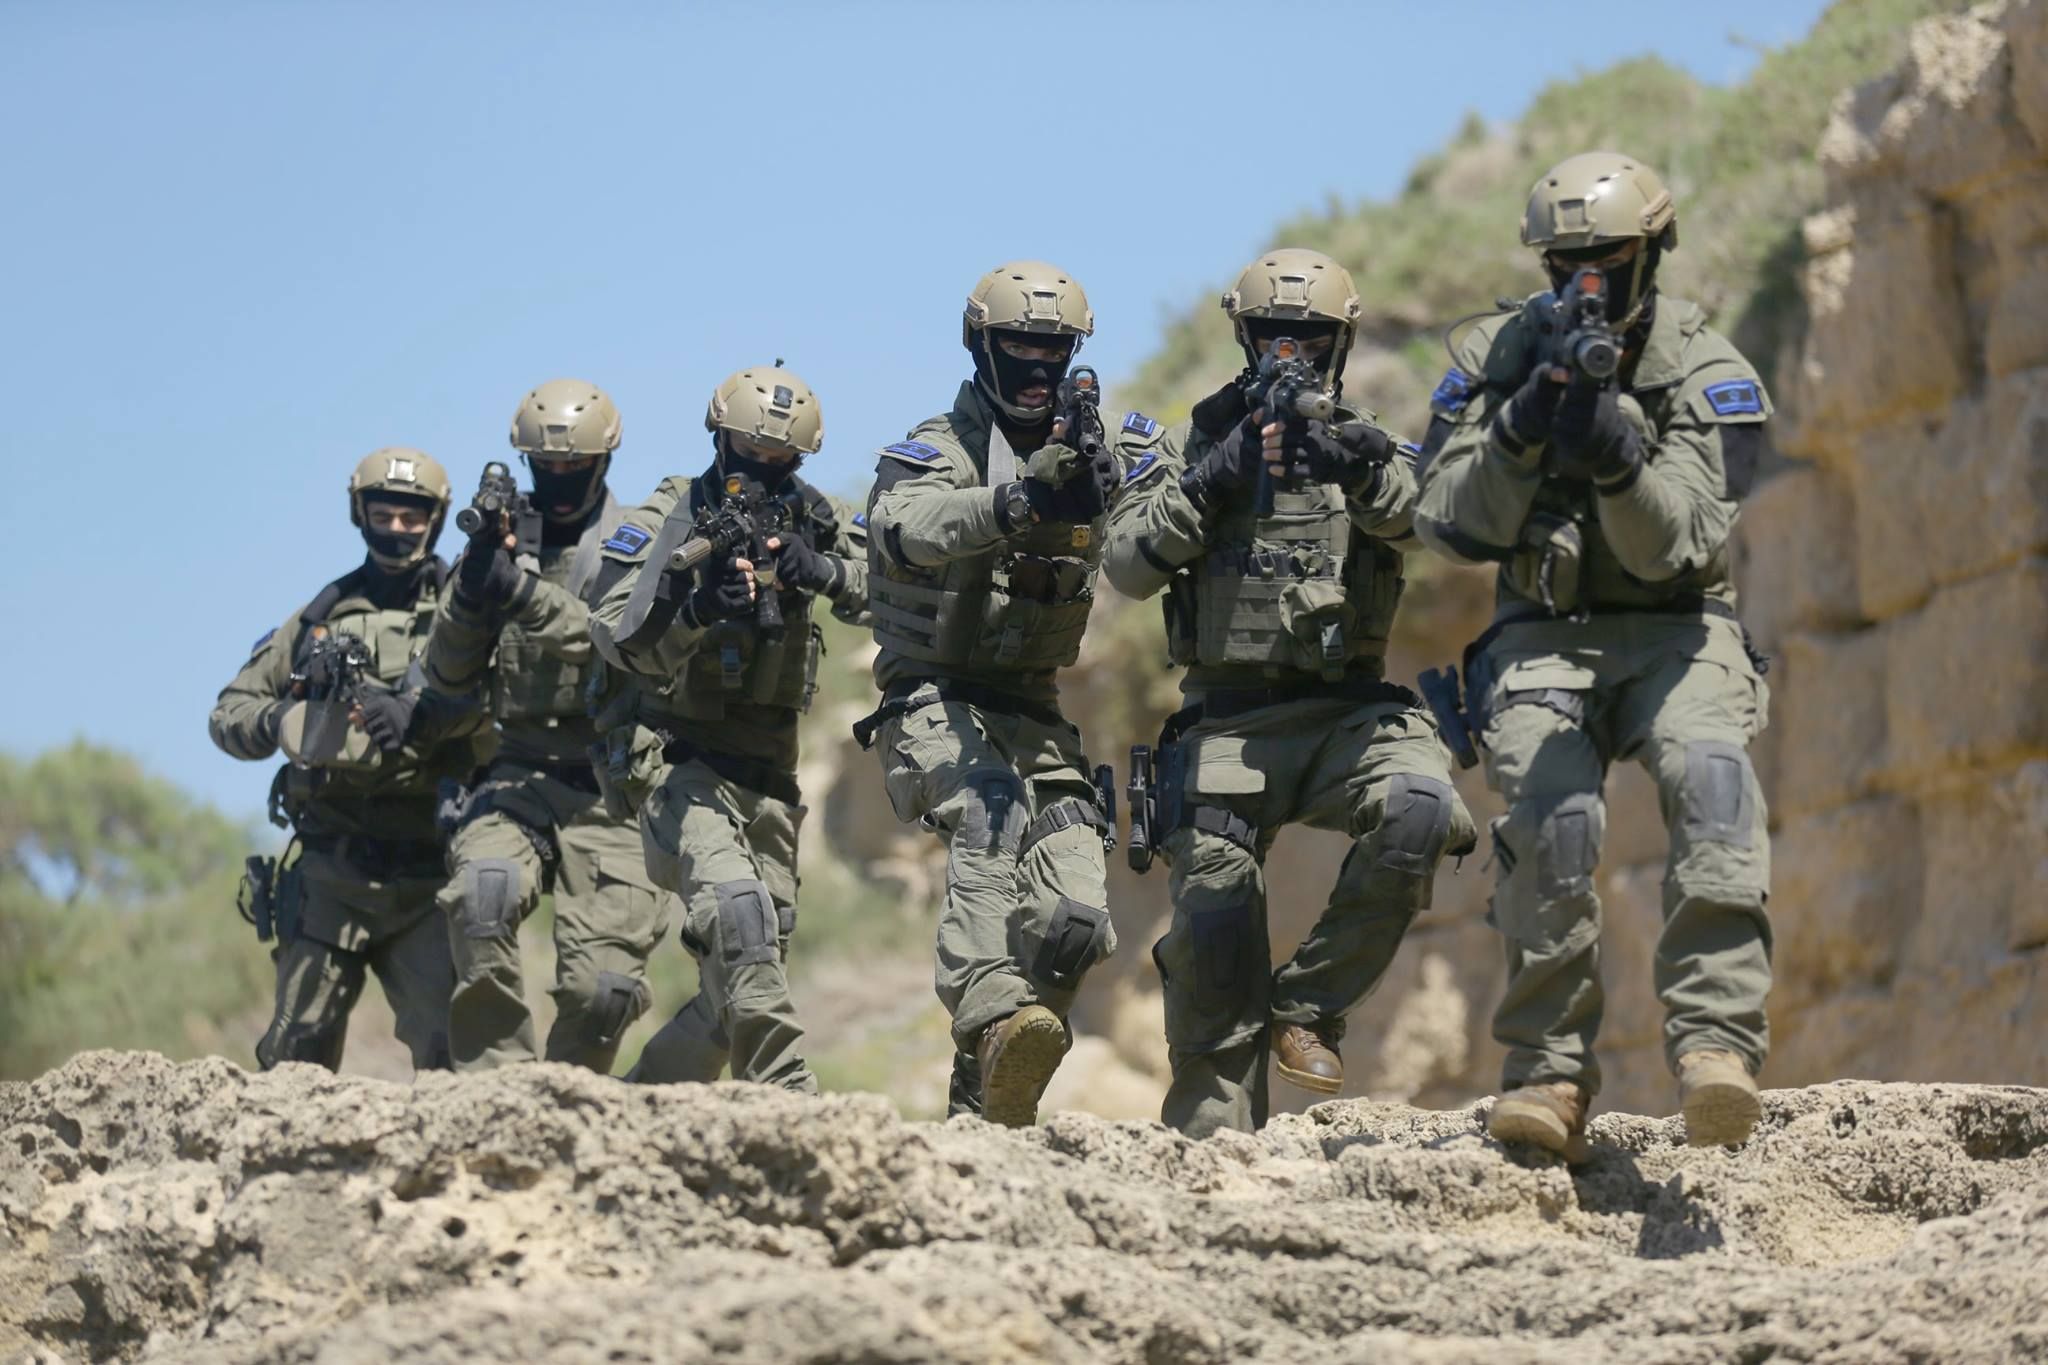 15 of the most dangerous commando units of the world